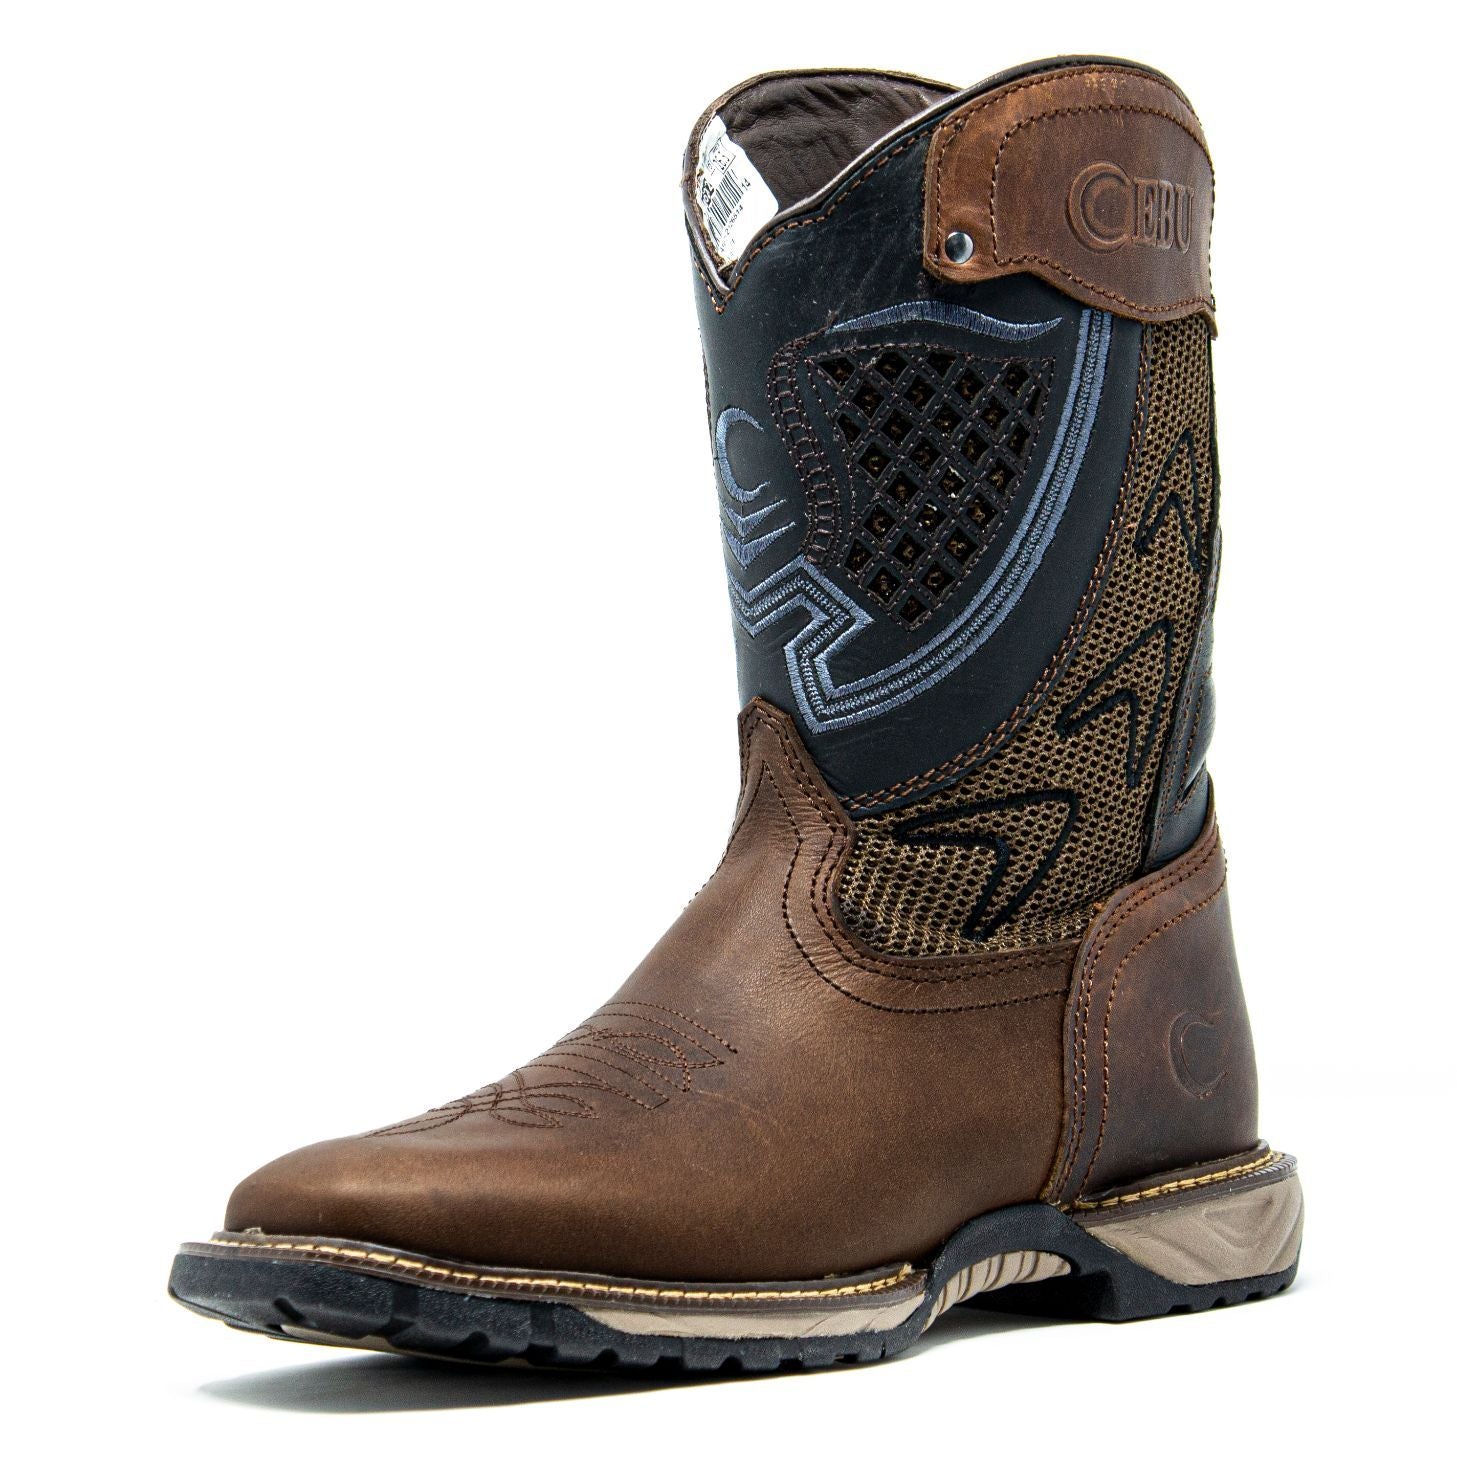 Men's Work Boots - Square Toe & Lightweight - Brown Work Boots - Cebu - Pull On Work Boots - Brown Wellington Work Boots